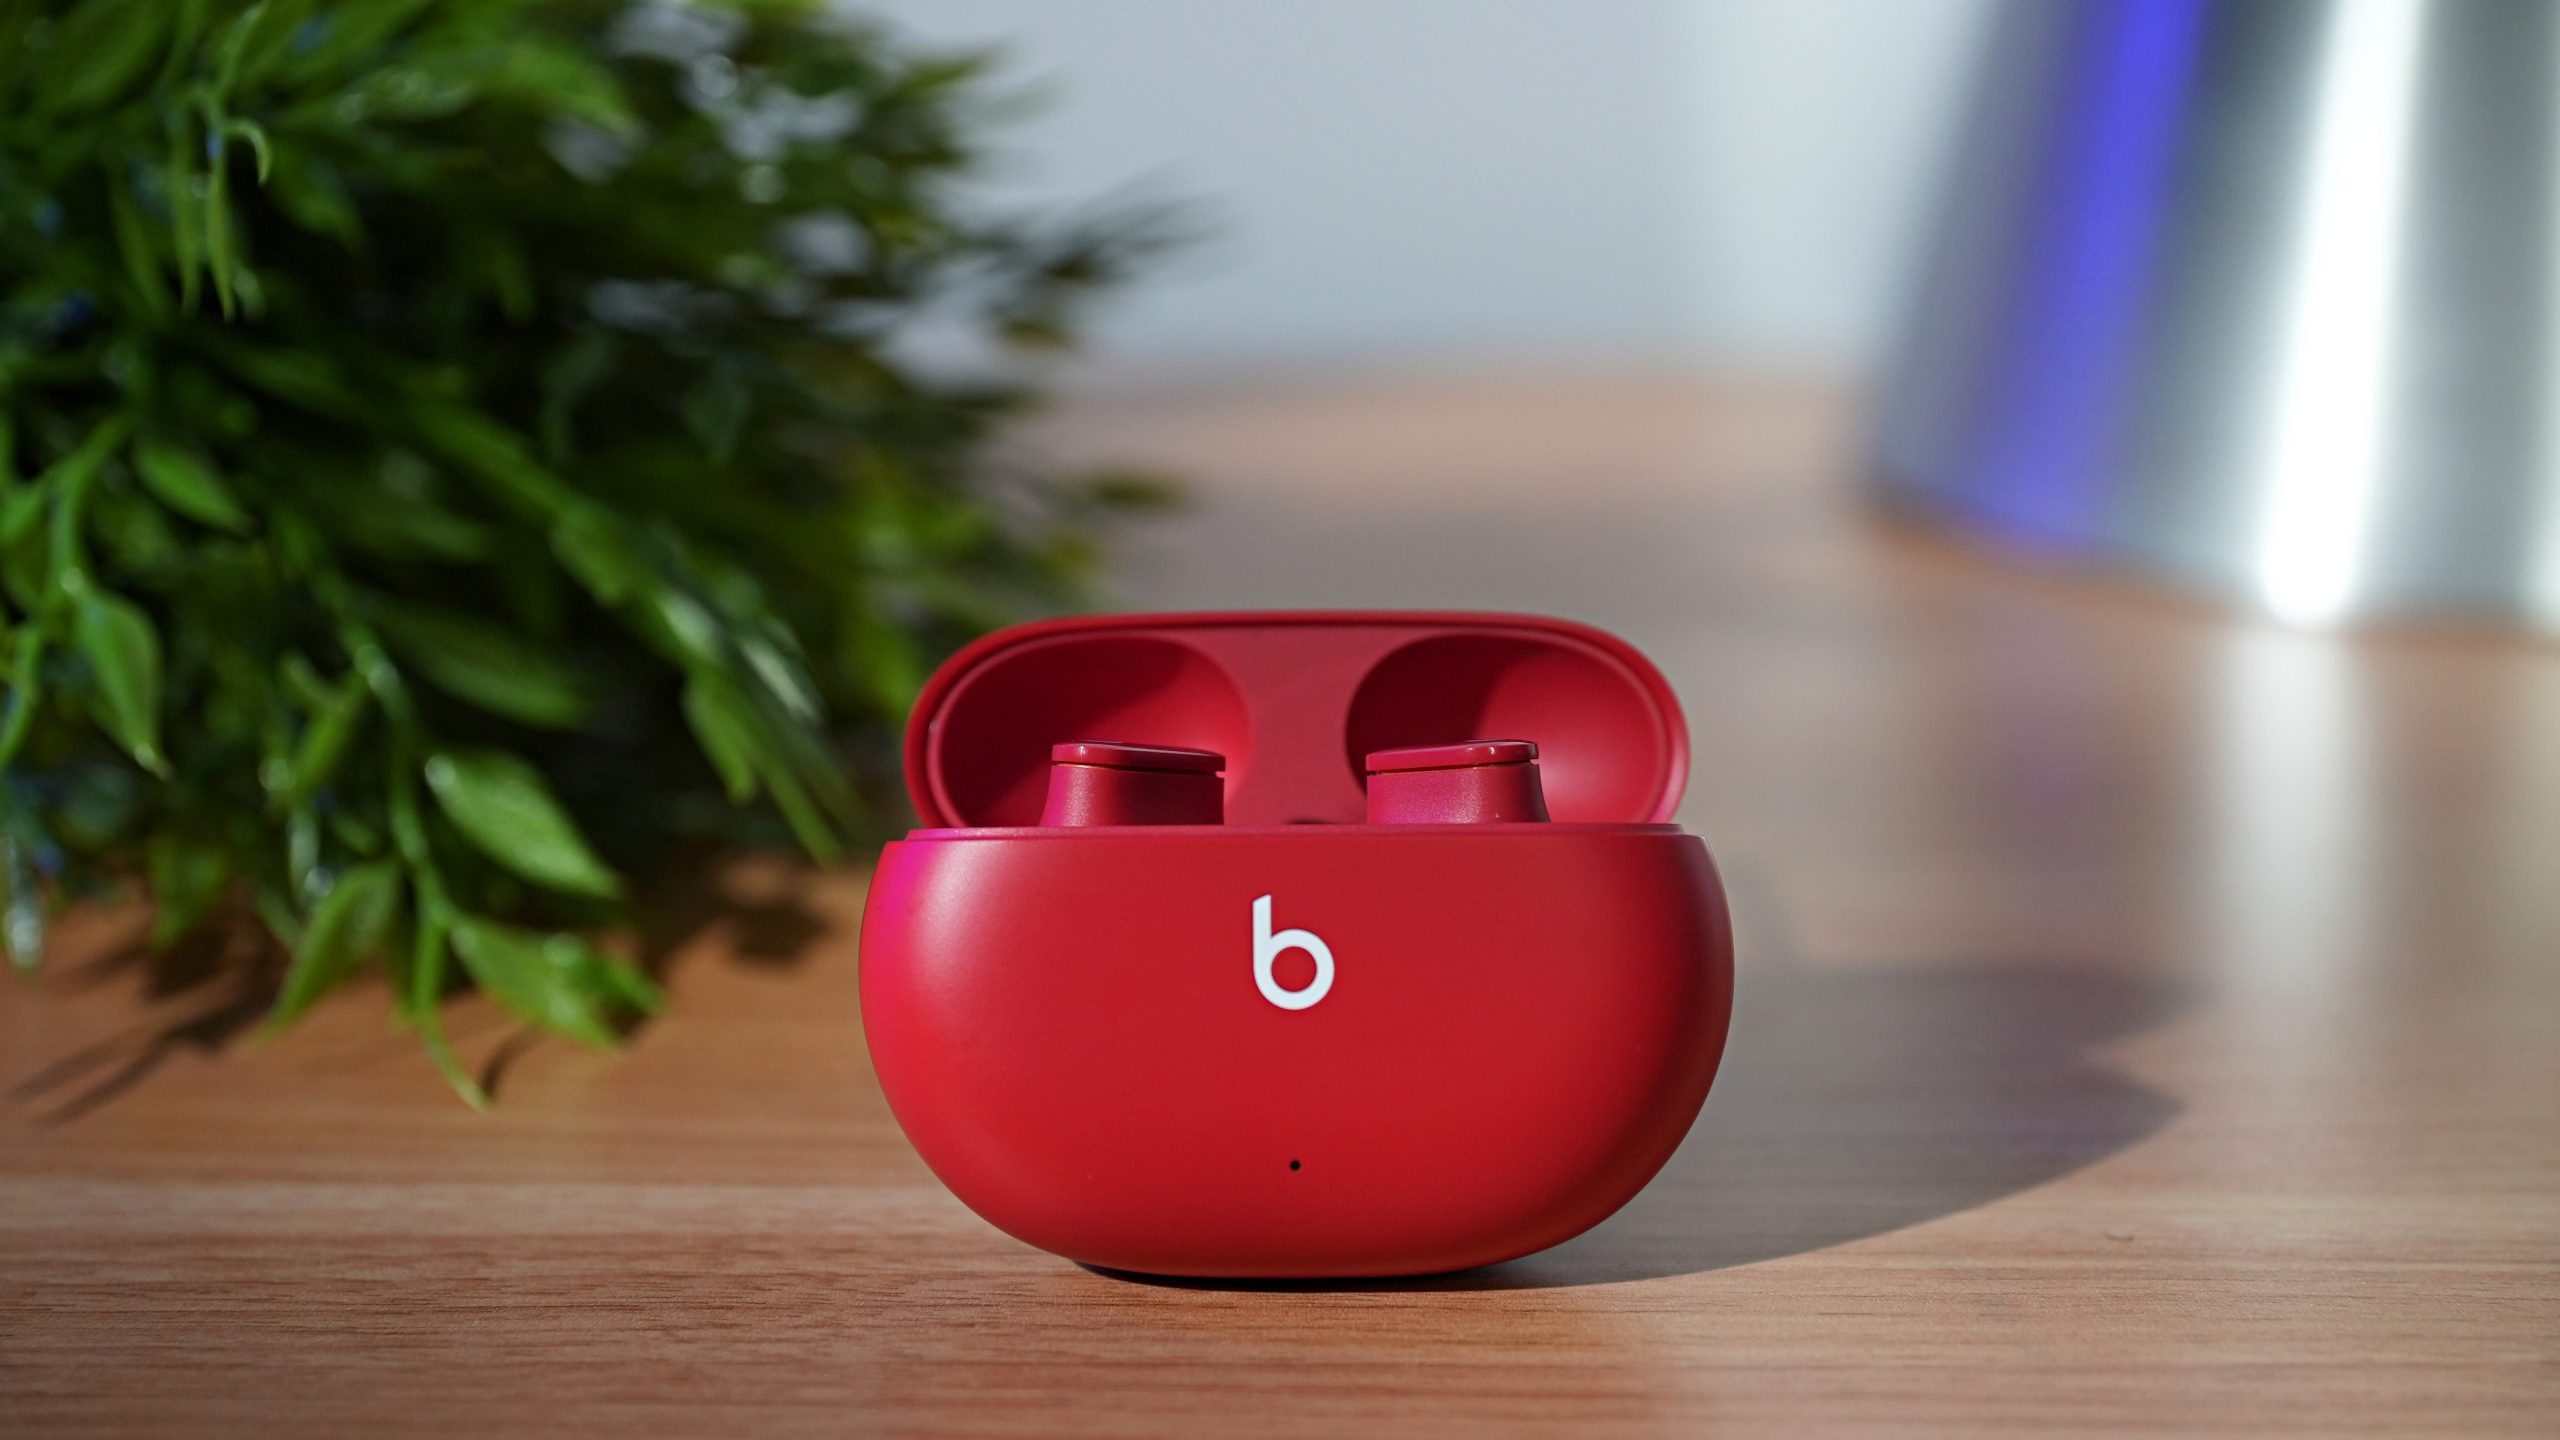 Beats Studio Buds review: Android and Apple-friendly - SoundGuys